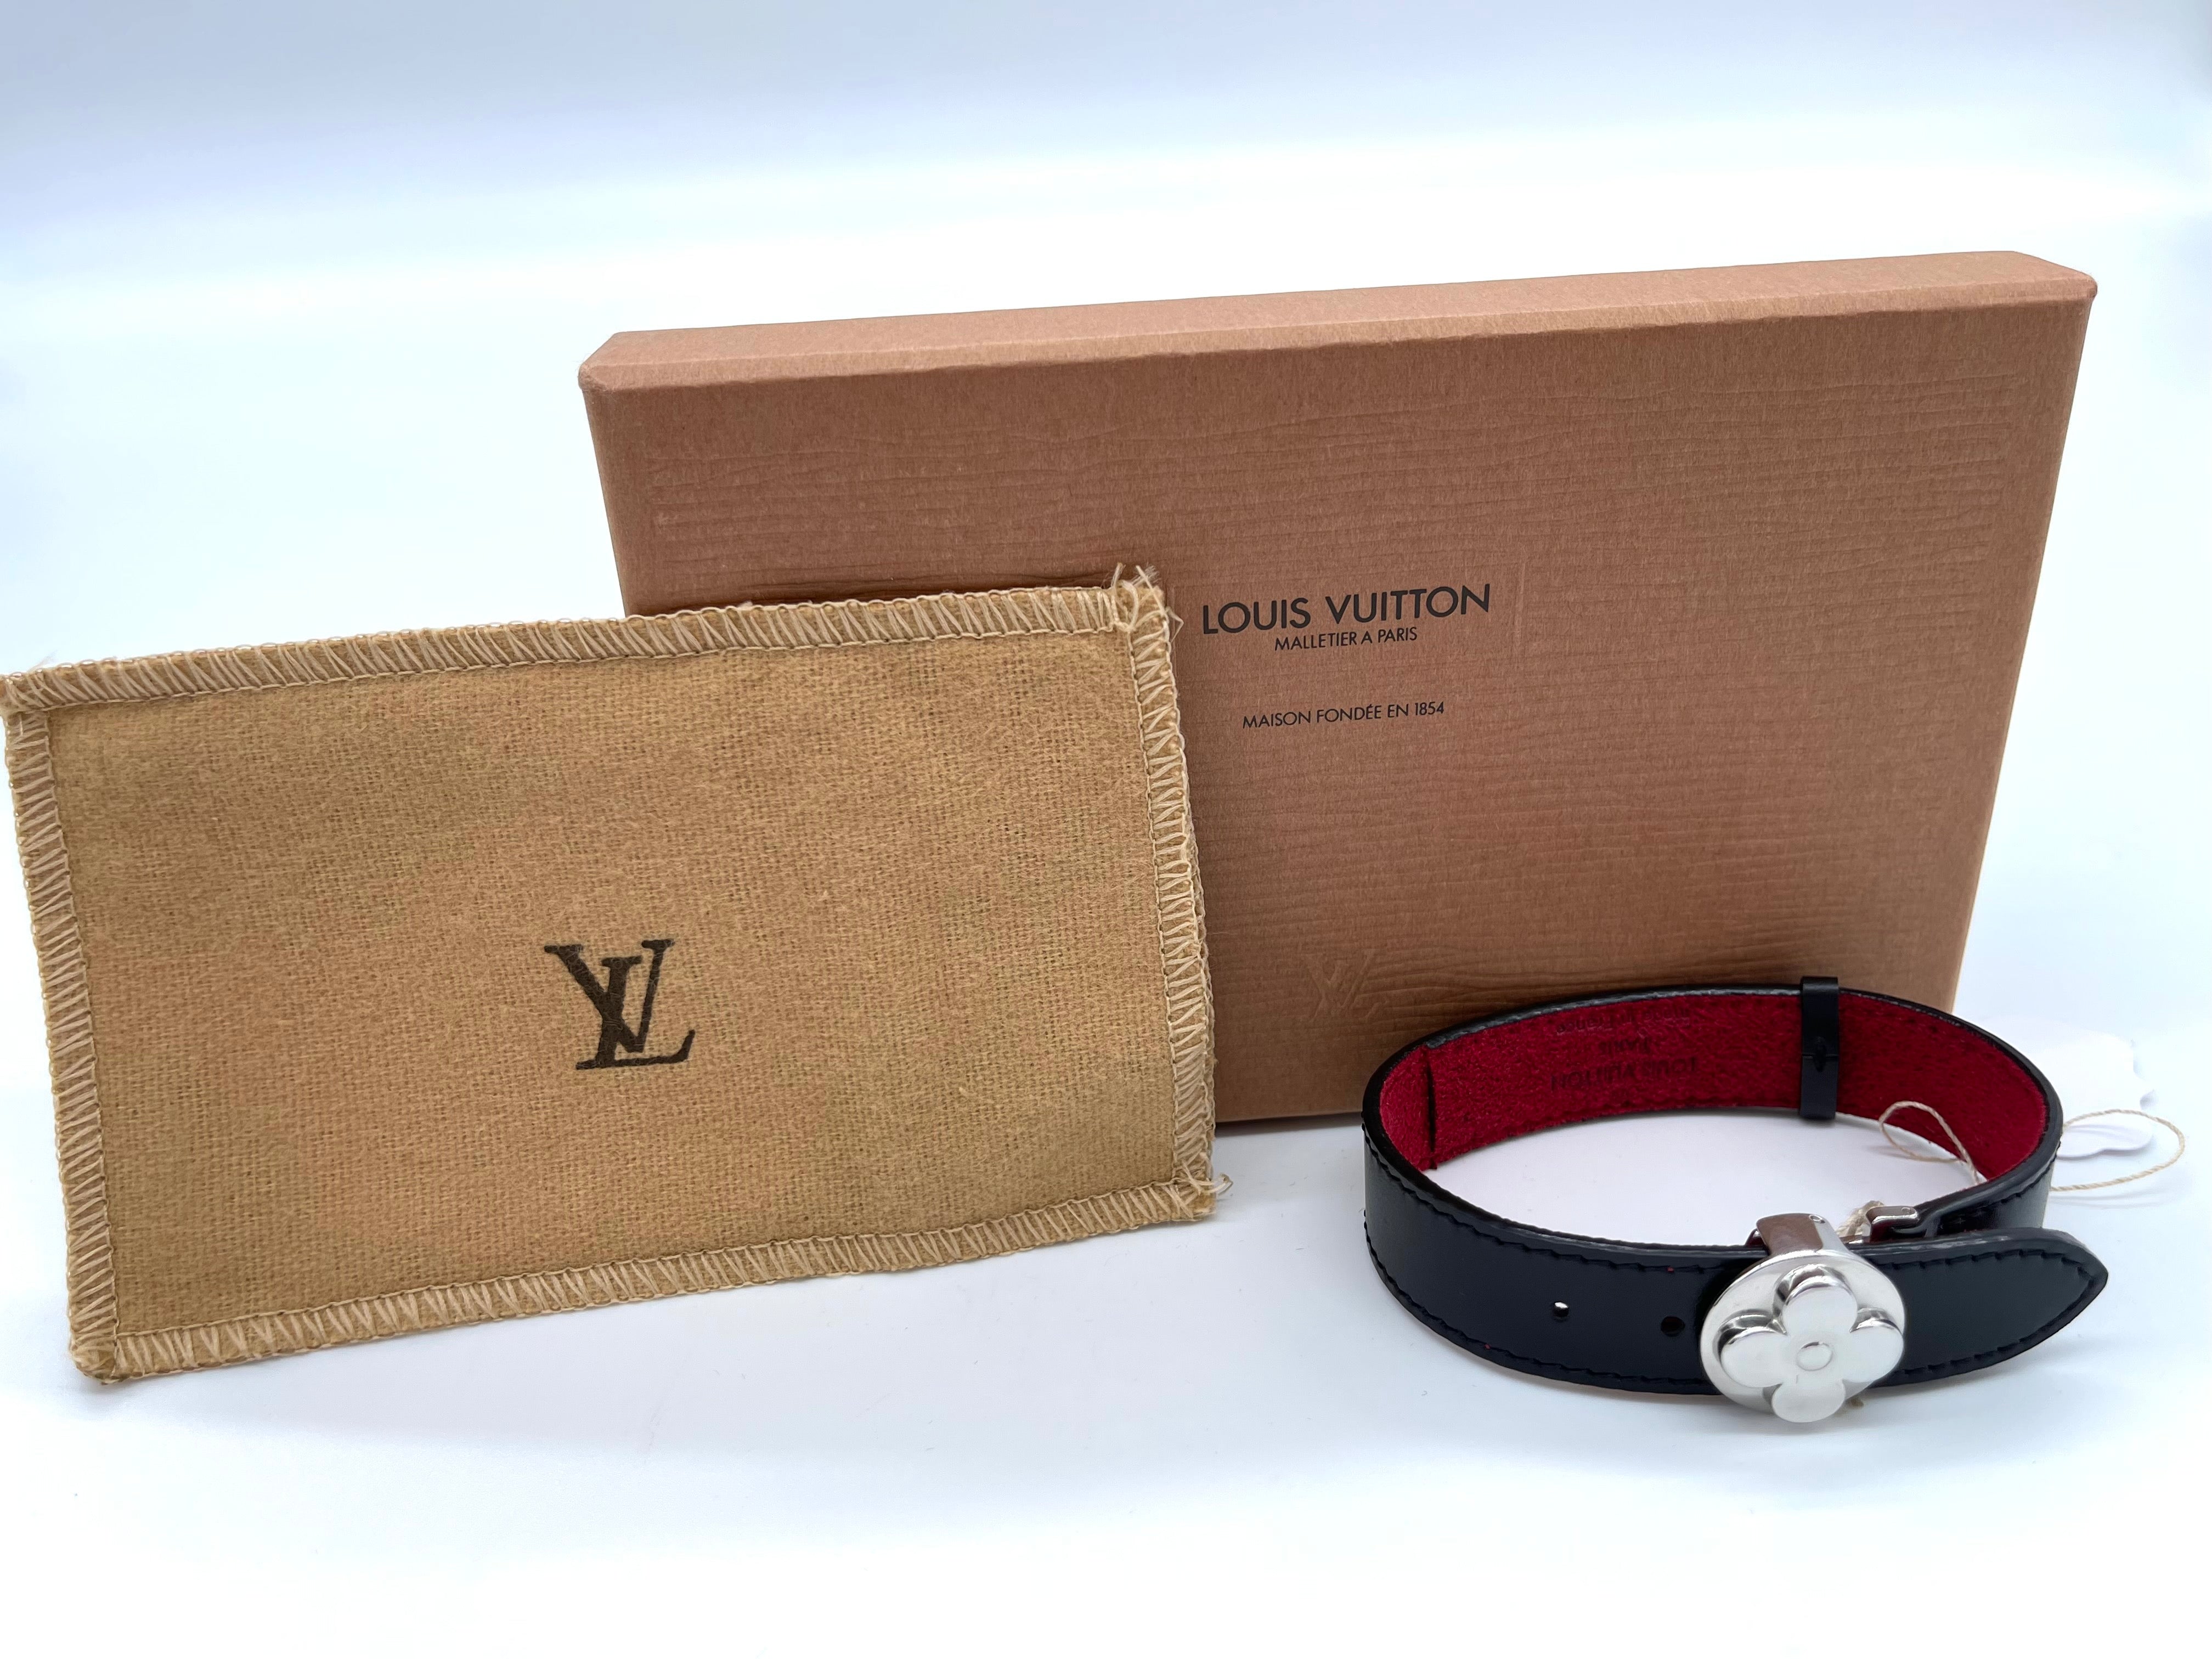 Louis Vuitton Good Luck Leather Bracelet  Rent Louis Vuitton jewelry for  $55/month